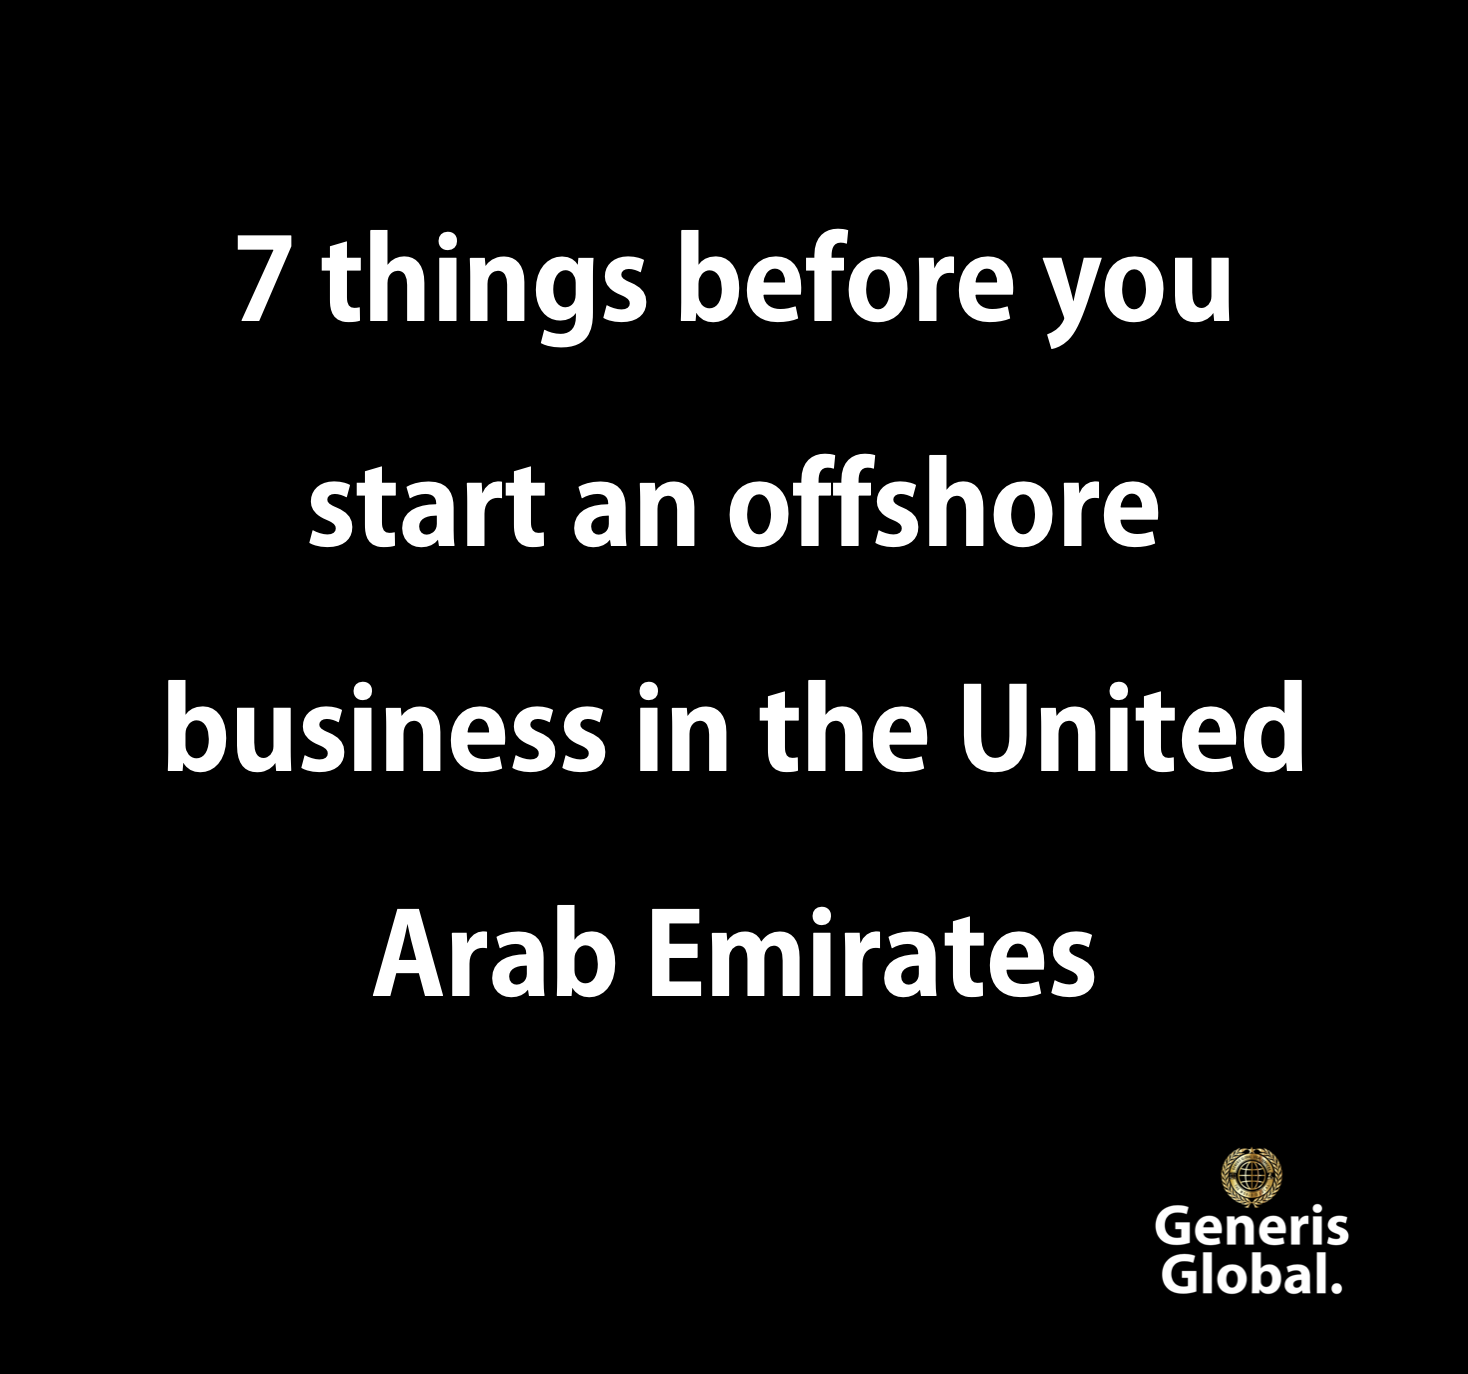 7 things before you start an offshore business in the United Arab Emirates.